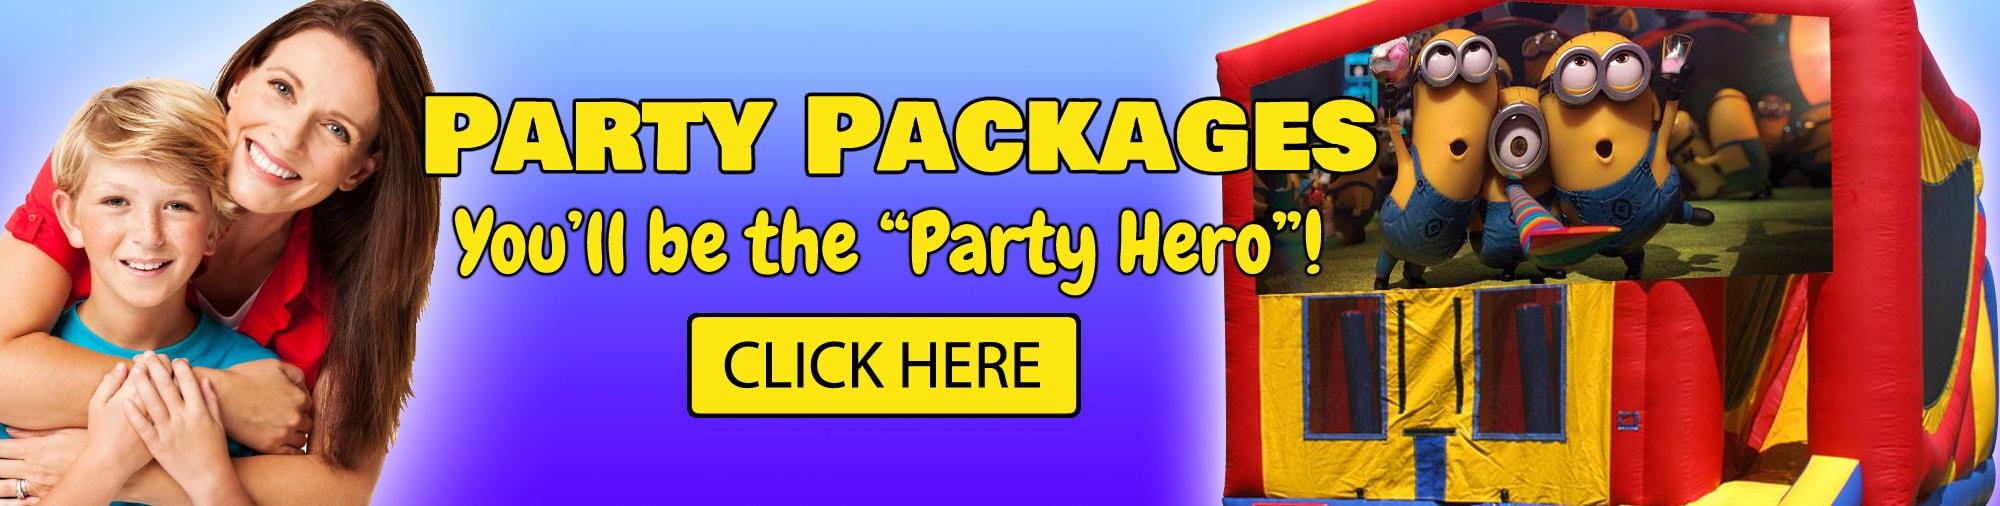 Los Angeles Party Packages